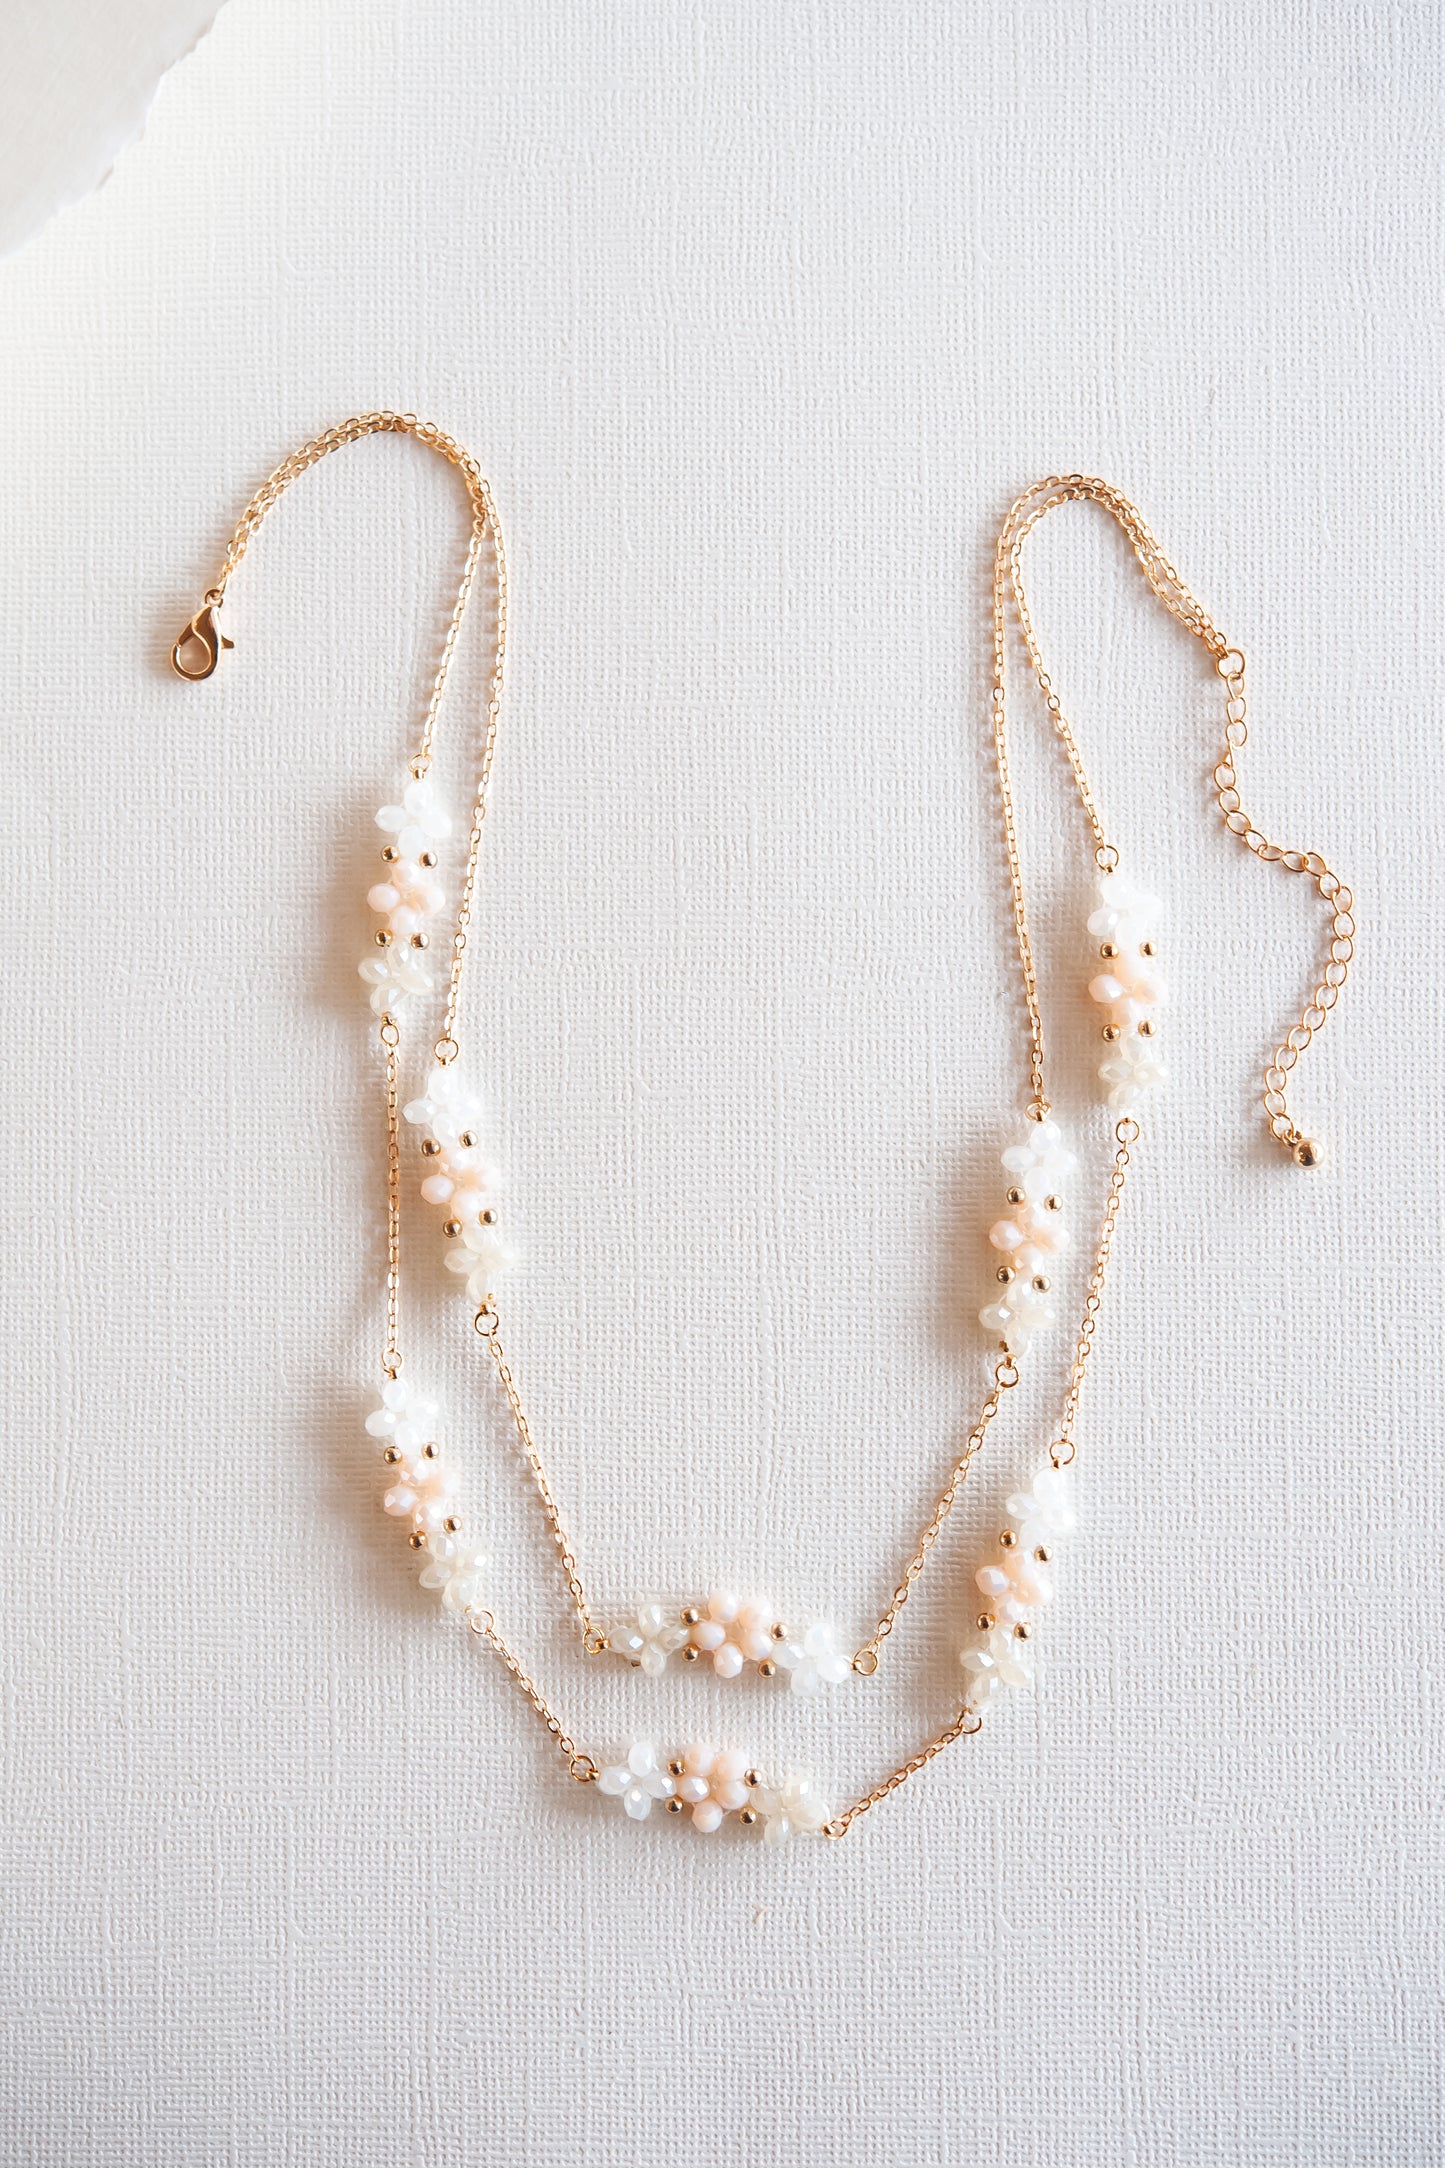 Justine Floral Beaded Necklace | Blush Layering Necklace